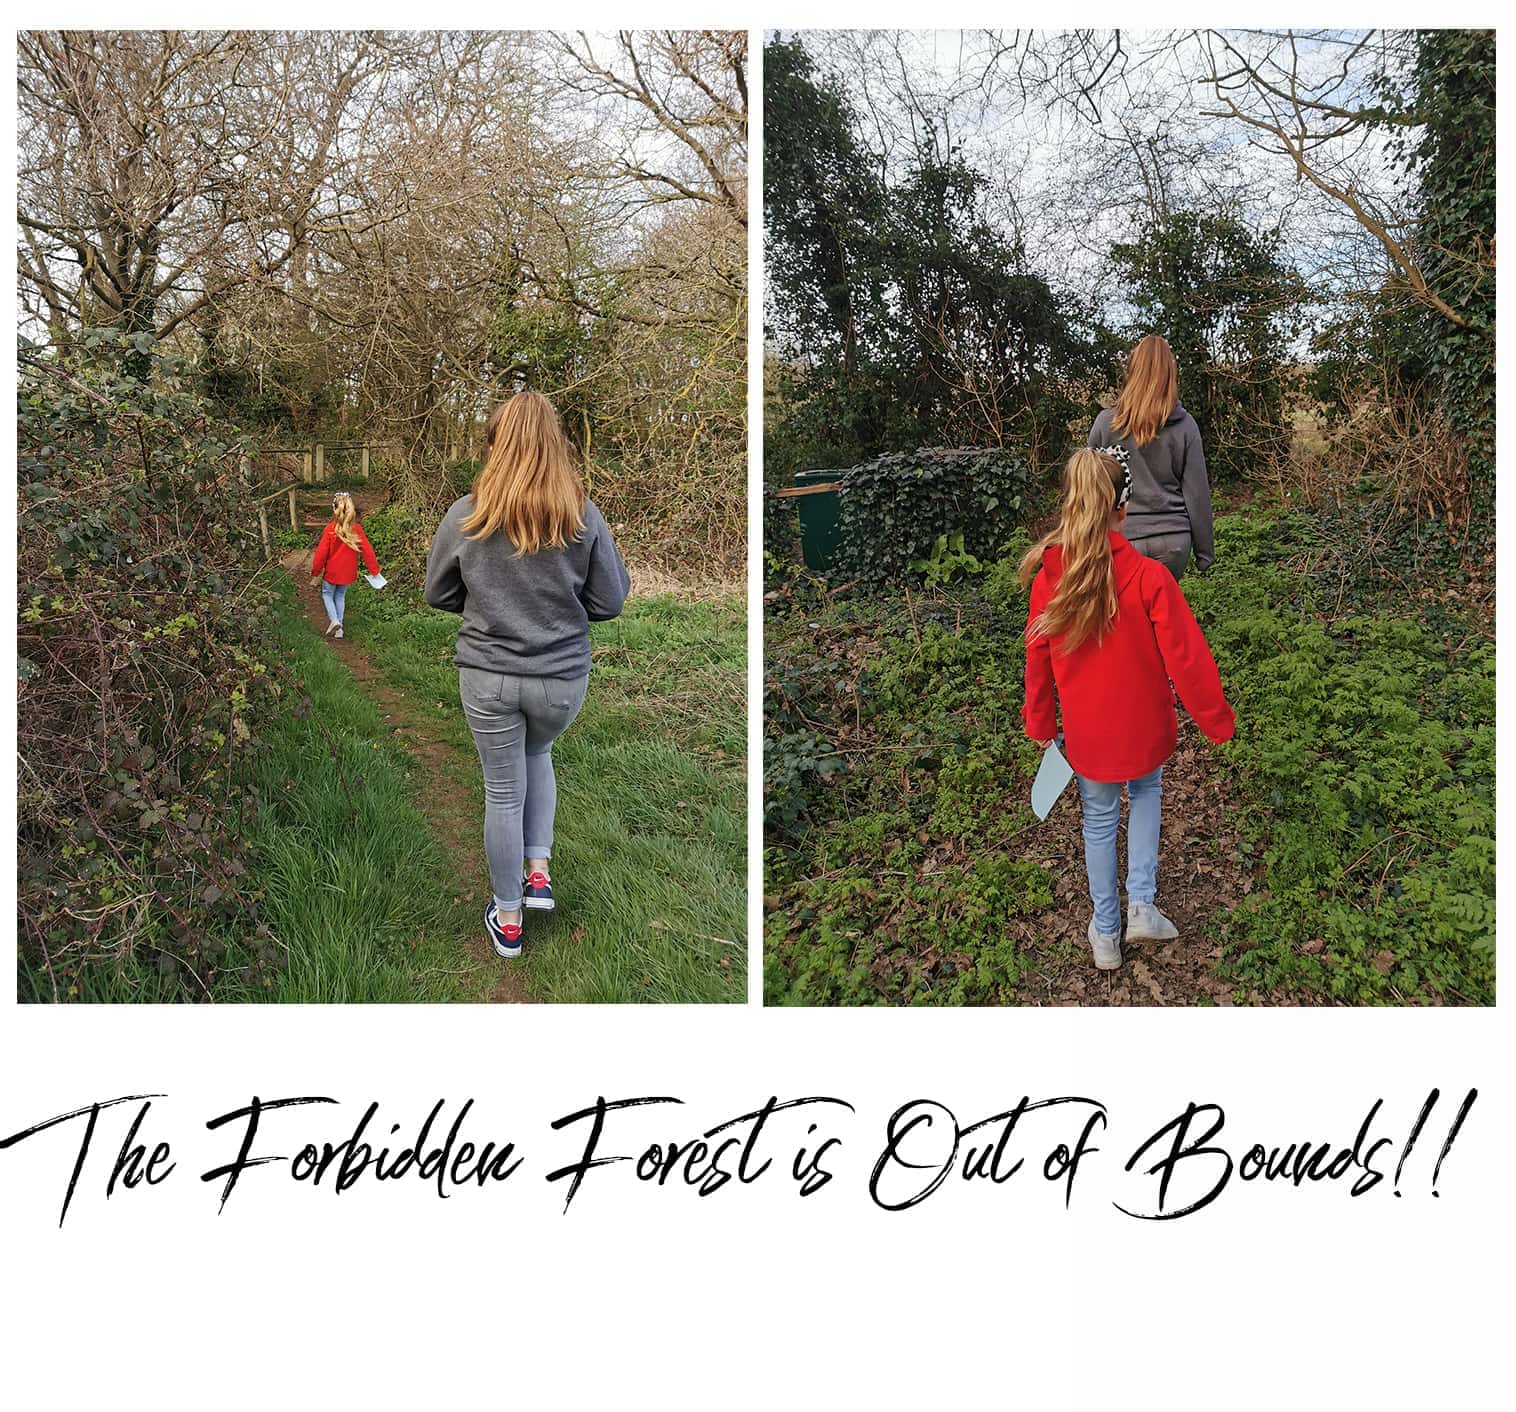 Scavenger hunt, Harry potter inspired, Forbidden forest inspired, woodland walk, st pauls cray, things to do with the kids, ashleigh shea photography